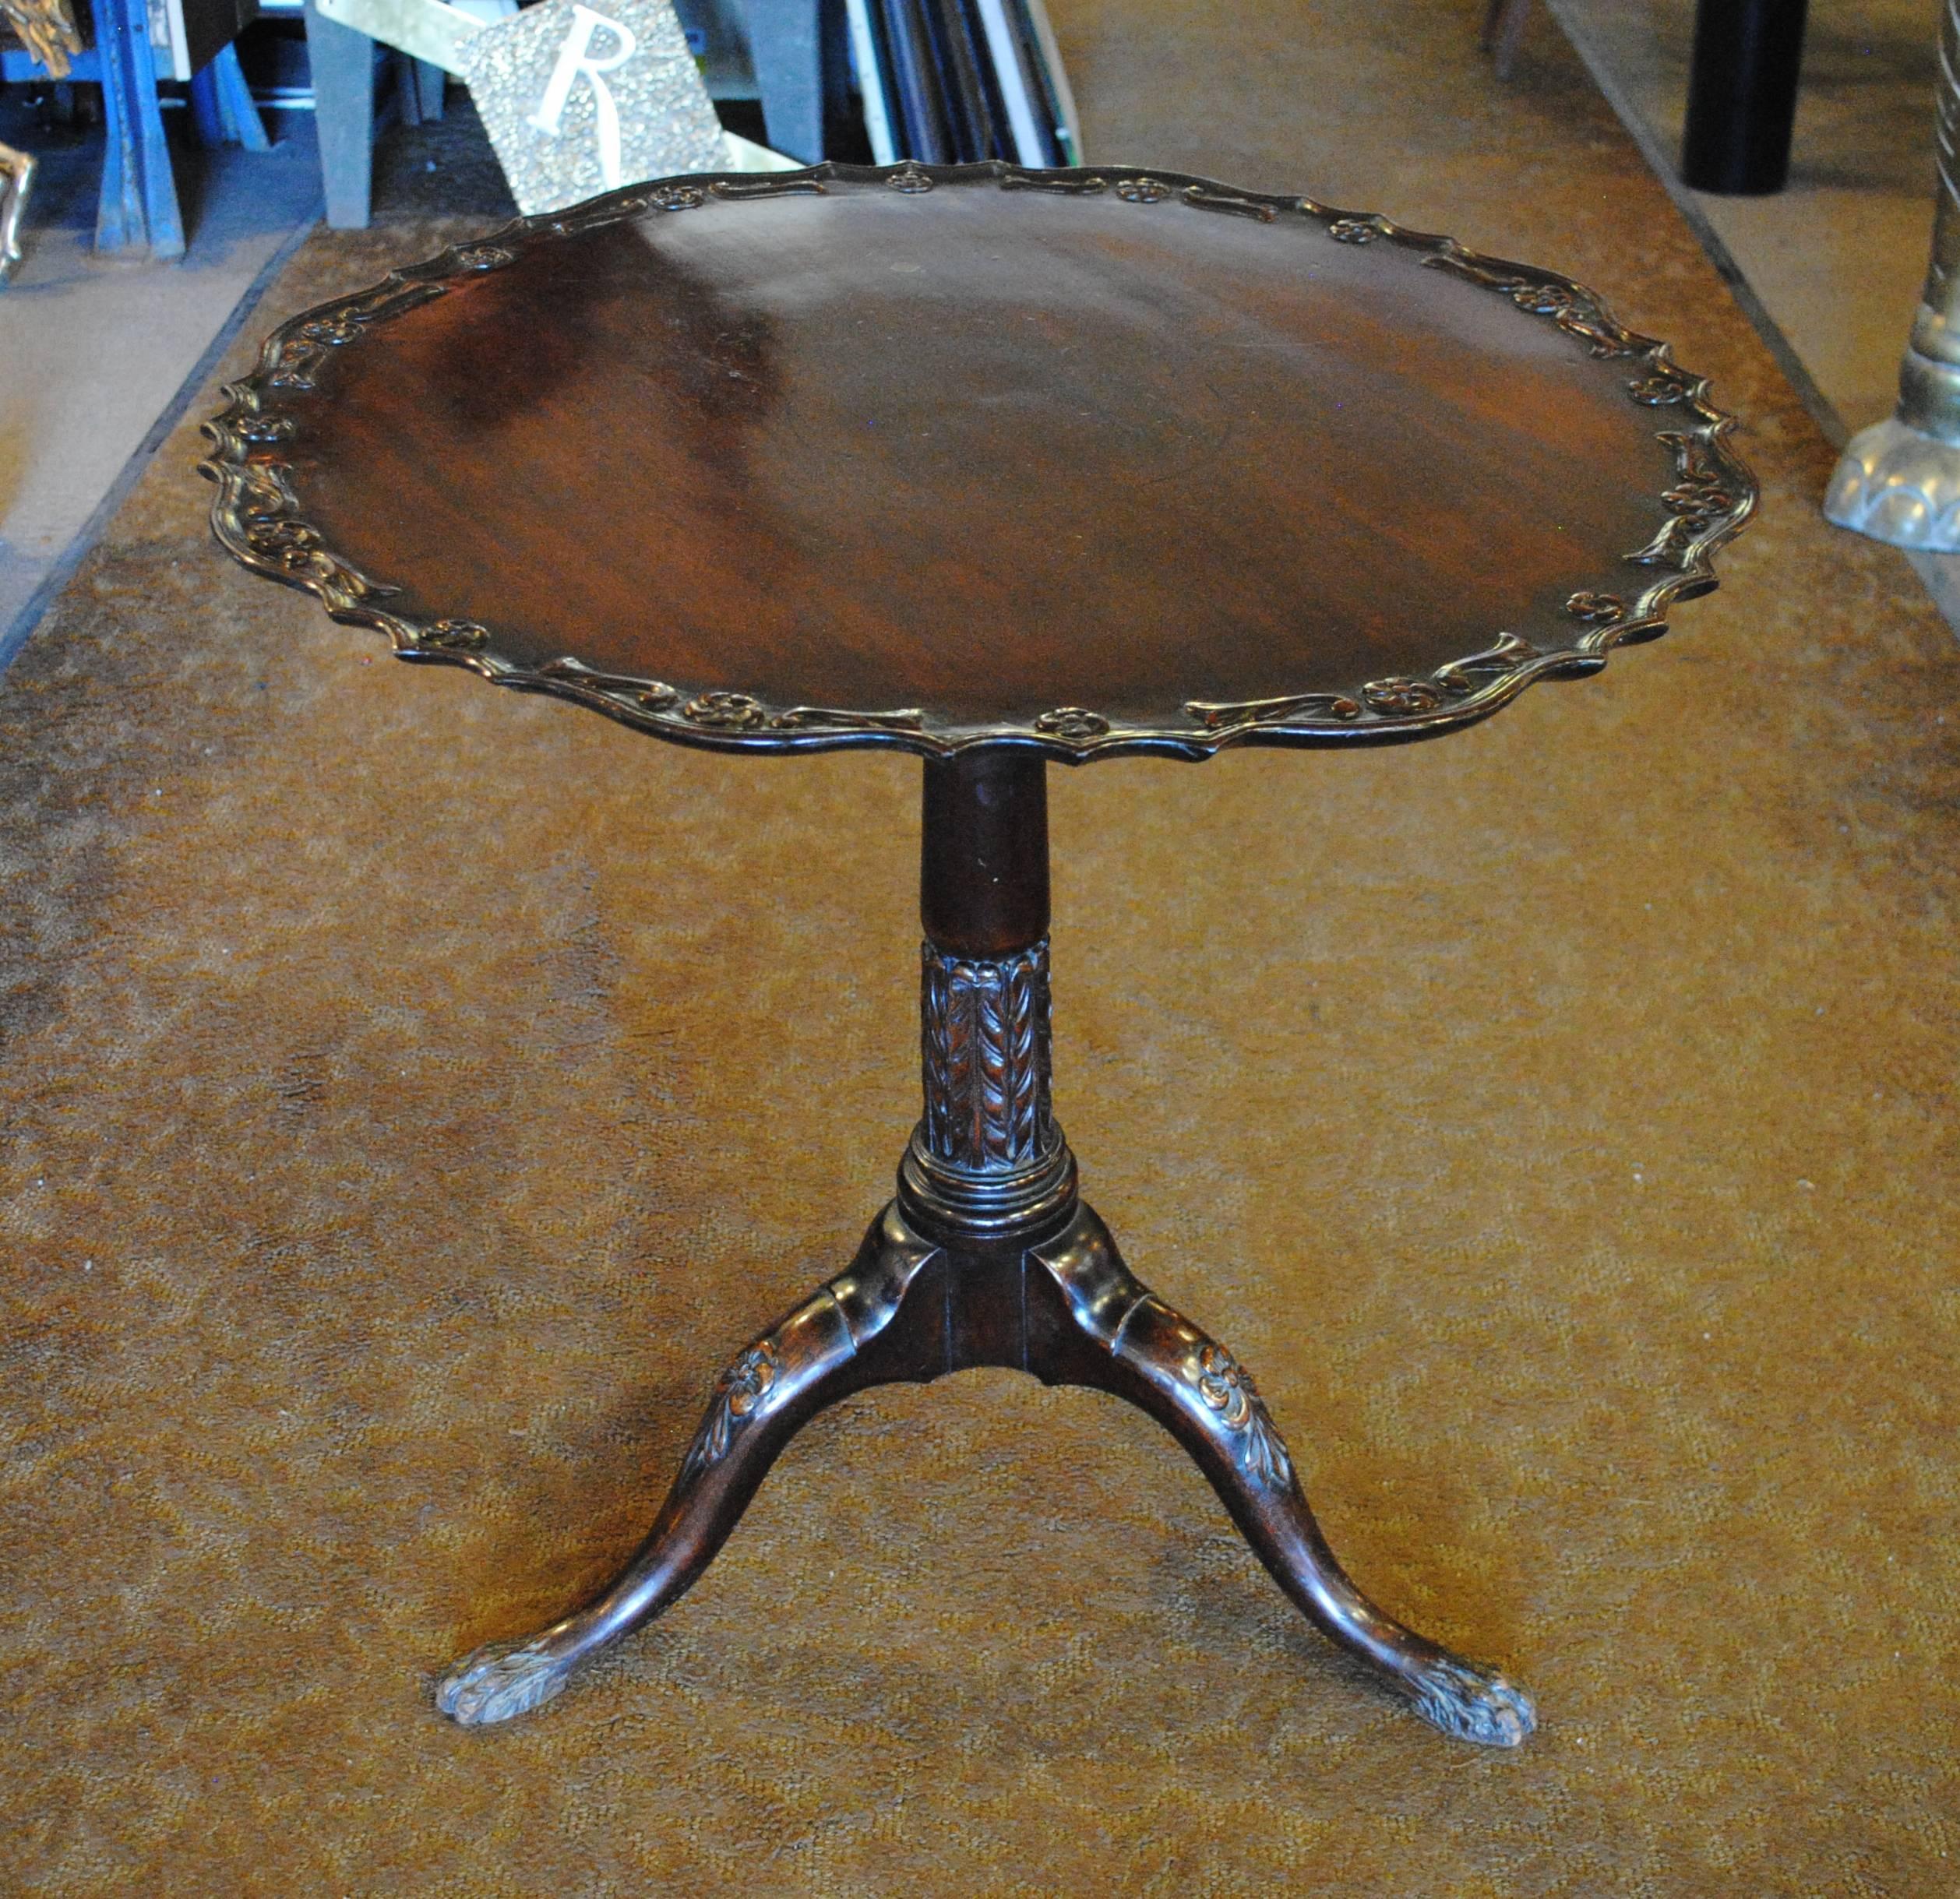 Chippendale style mahogany tilt-top table with pie crust edging, carved out of a solid board.